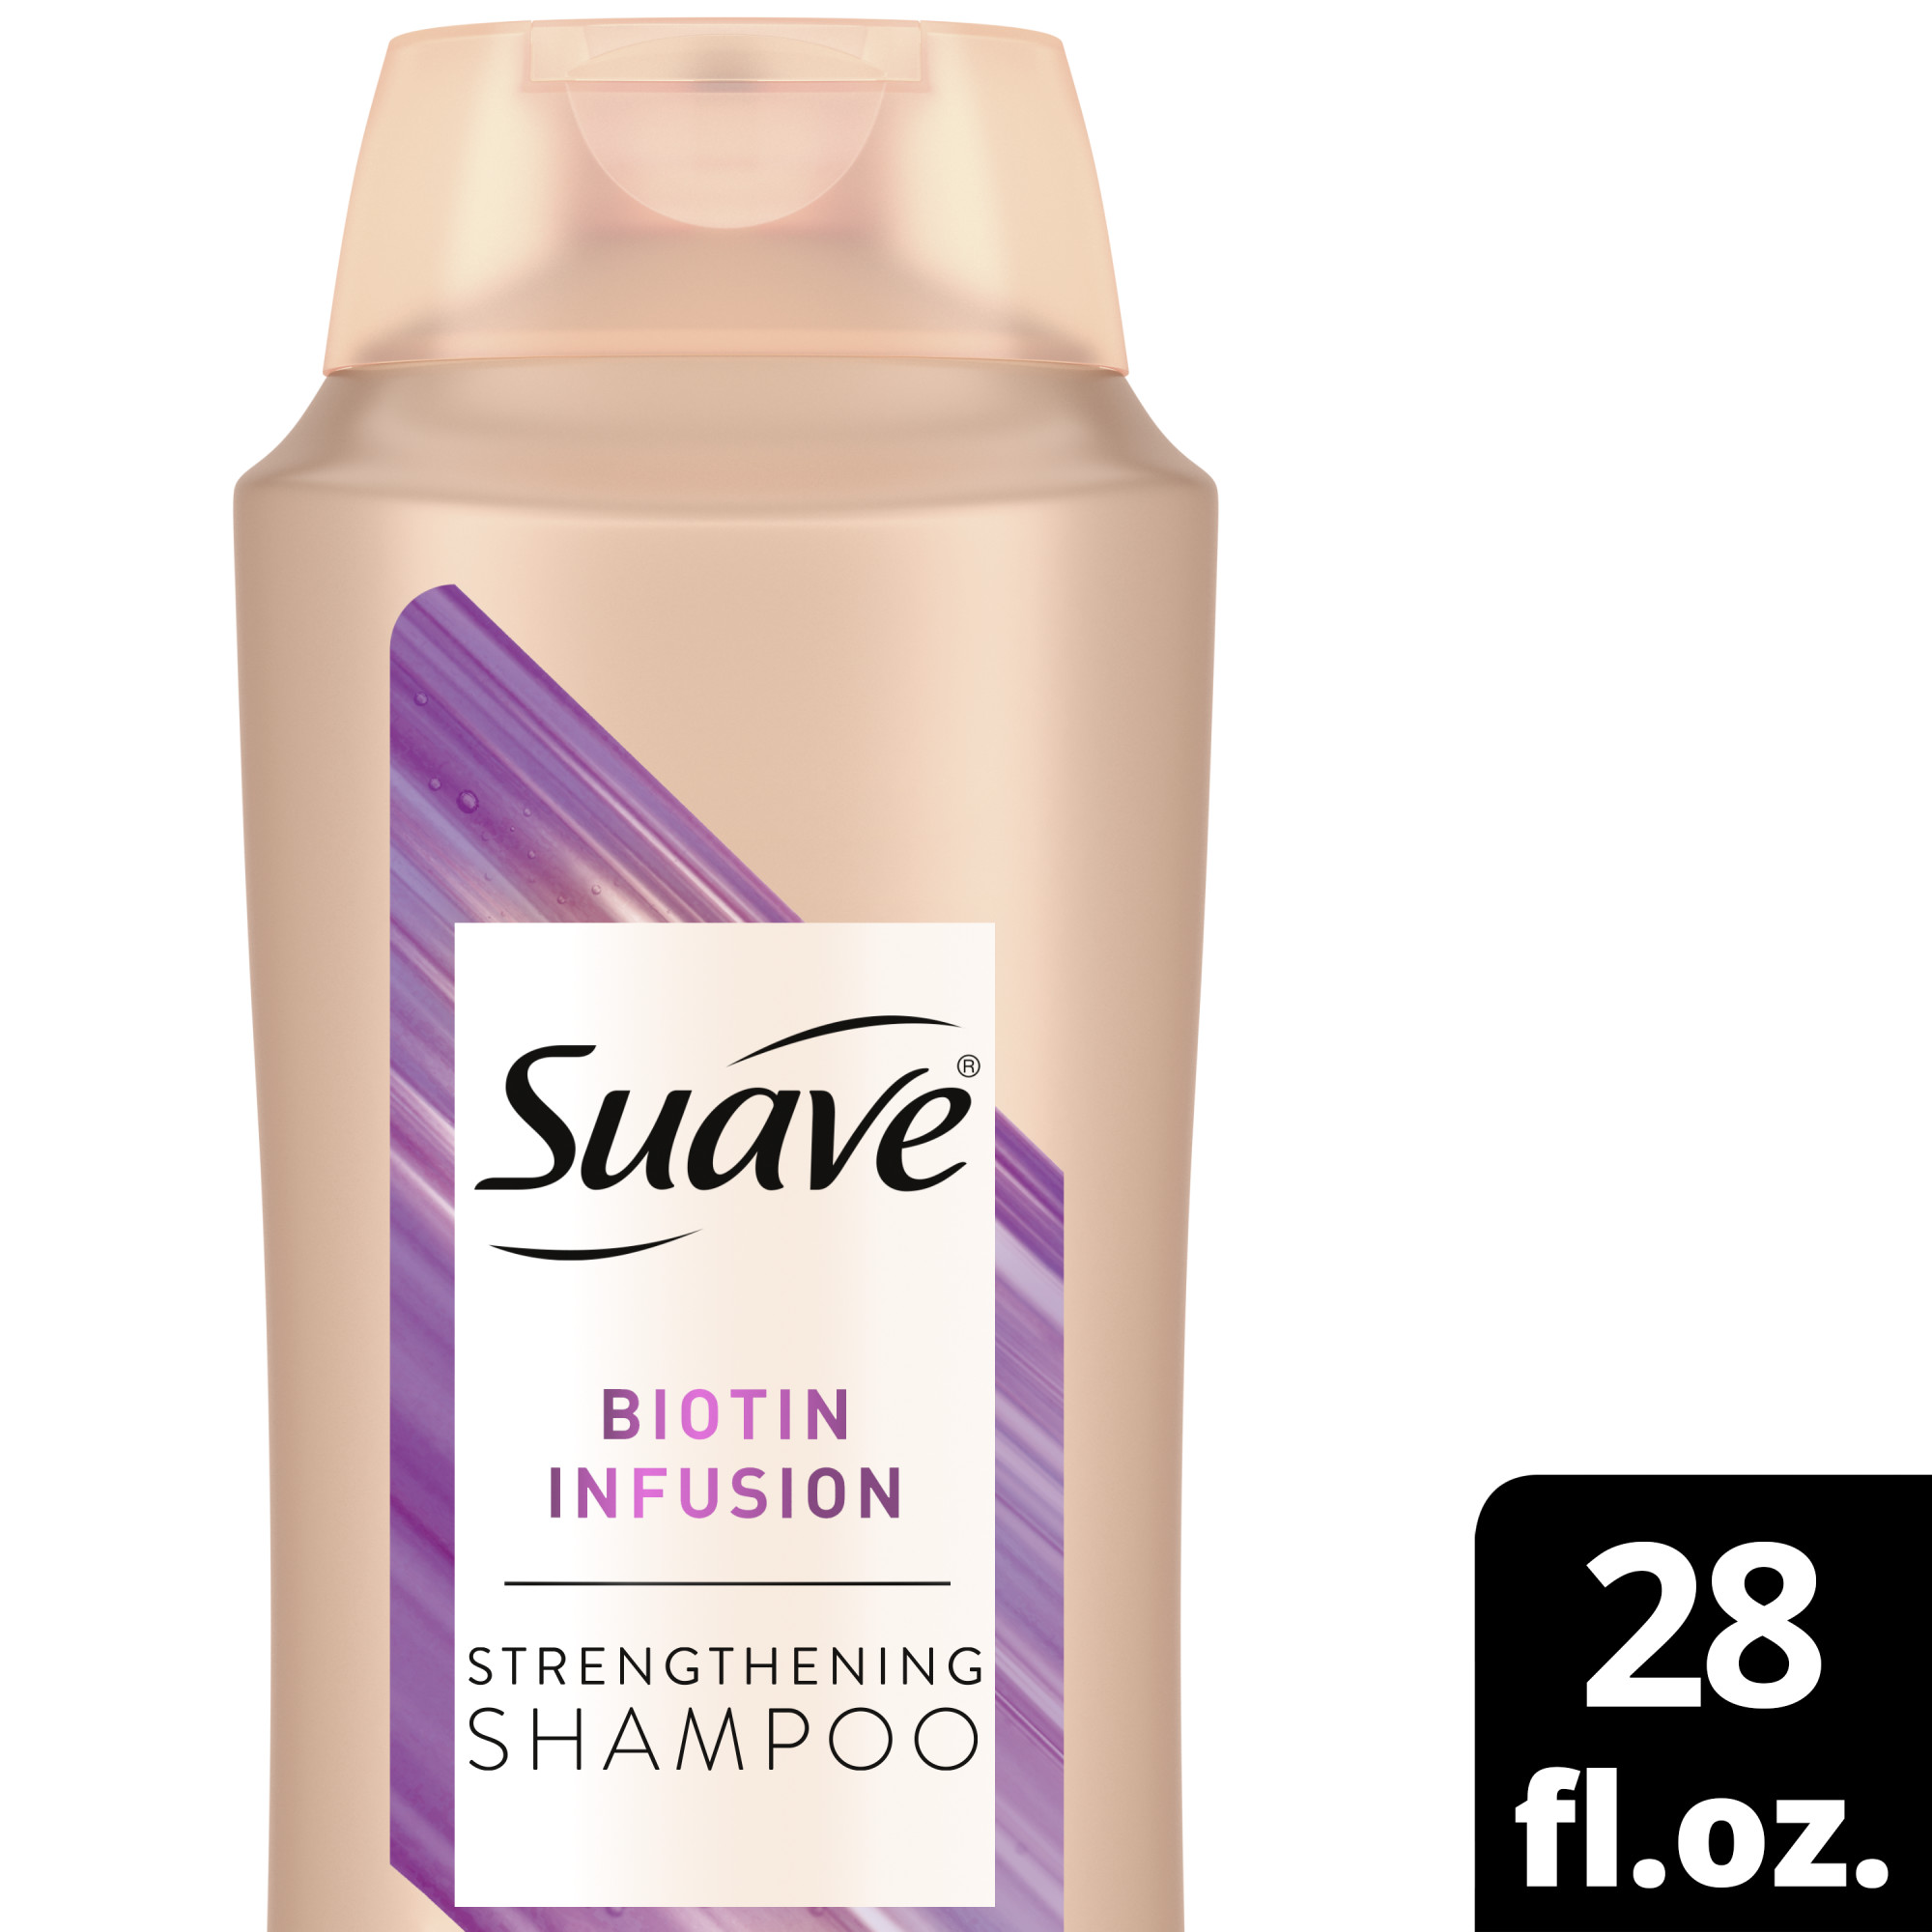 Suave Professionals Biotin Infusion Shampoo, Strengthening & Thickening, 28 fl oz - image 1 of 11